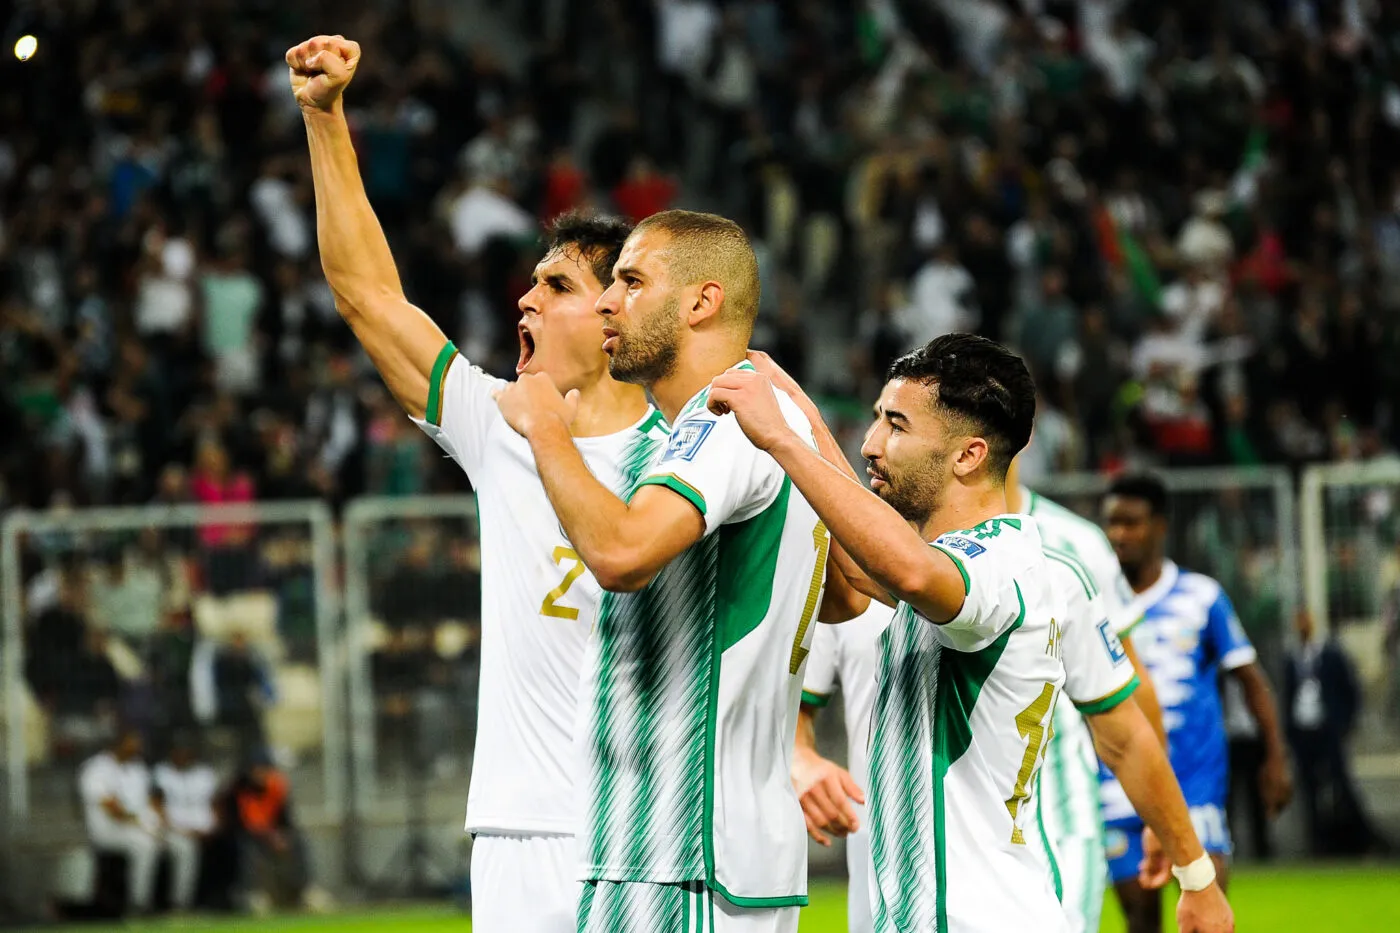 (231117) -- ALGIERS, Nov. 17, 2023 (Xinhua) -- Players of Algeria celebrate their goal during the Group G match between Algeria and Somalia of FIFA World Cup CAF Qualifiers in Algiers, Algeria, Nov. 16, 2023. (Xinhua) - Photo by Icon sport